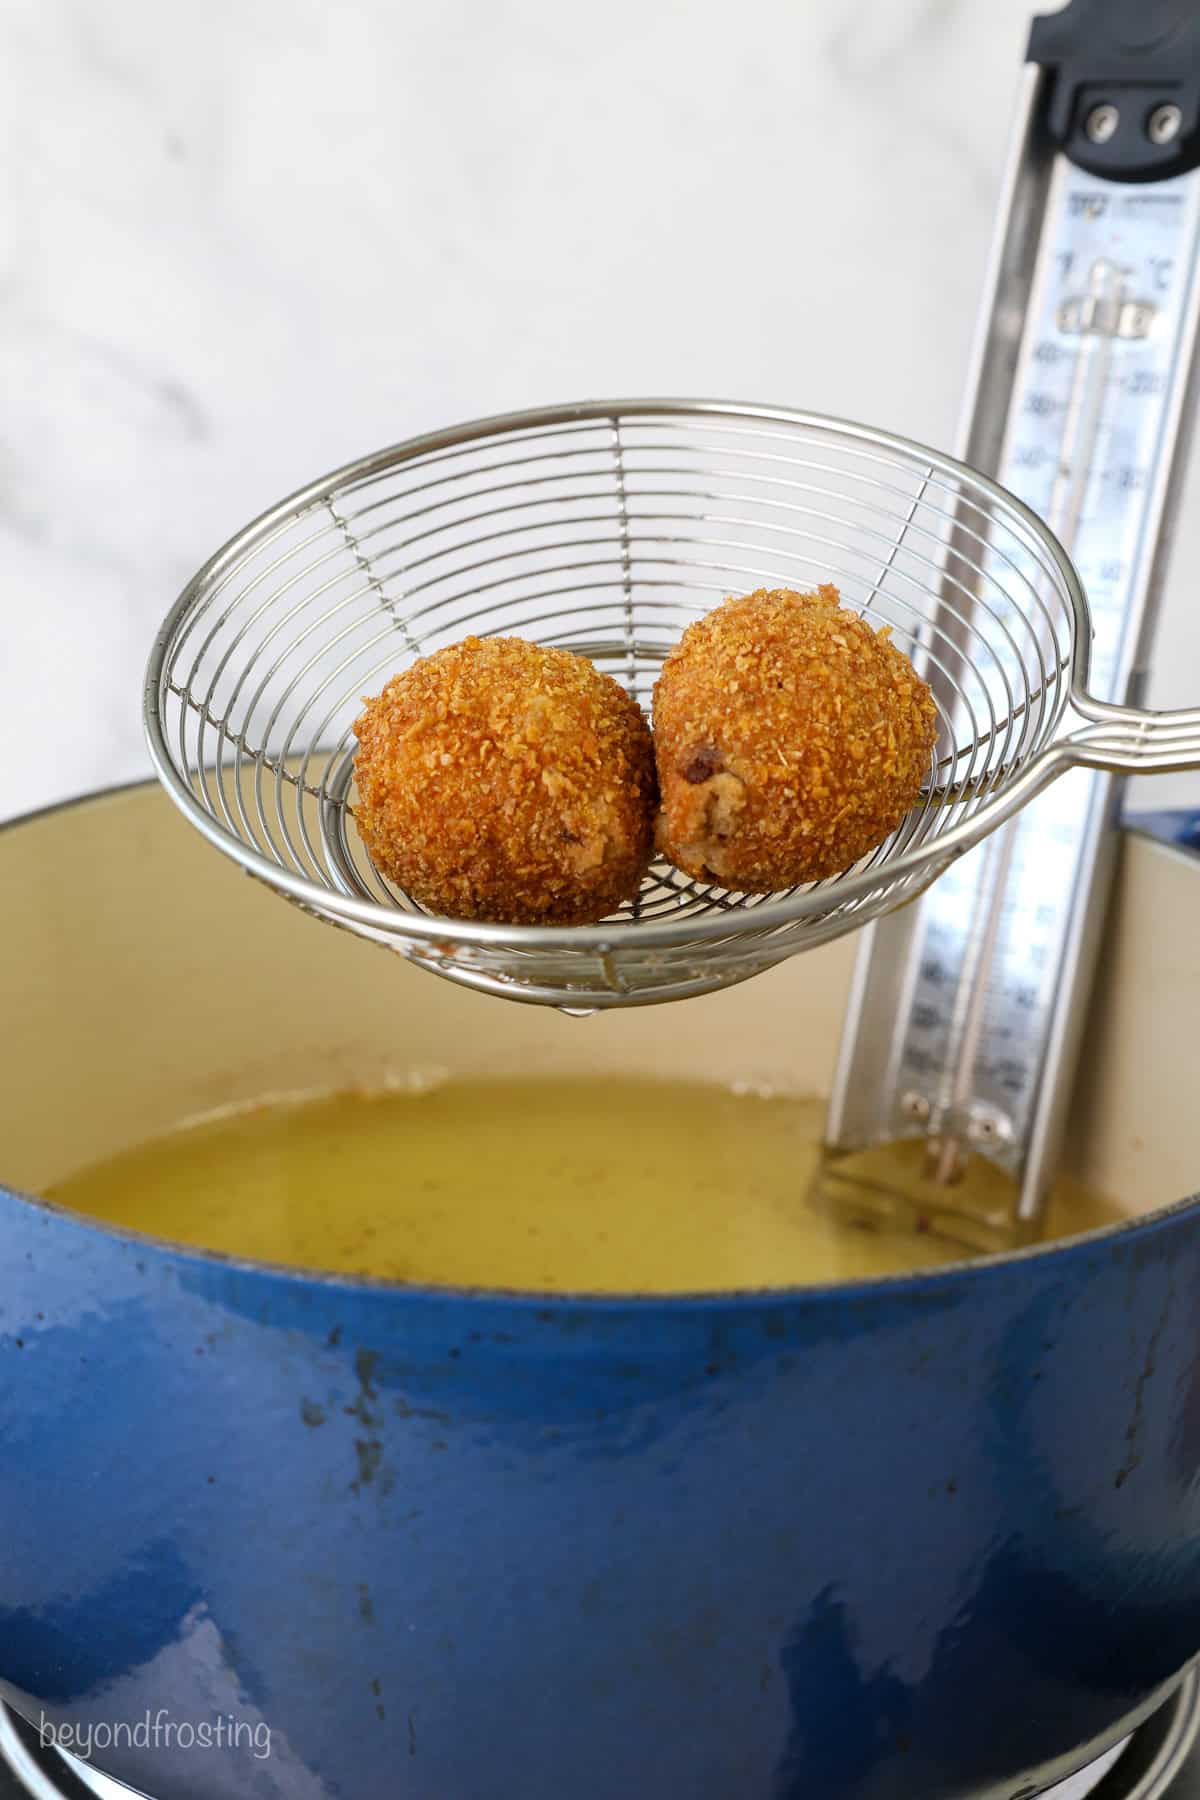 Two deep fried cookie dough balls in a metal slotted spoon, held over a pot of hot oil fitted with a candy thermometer.